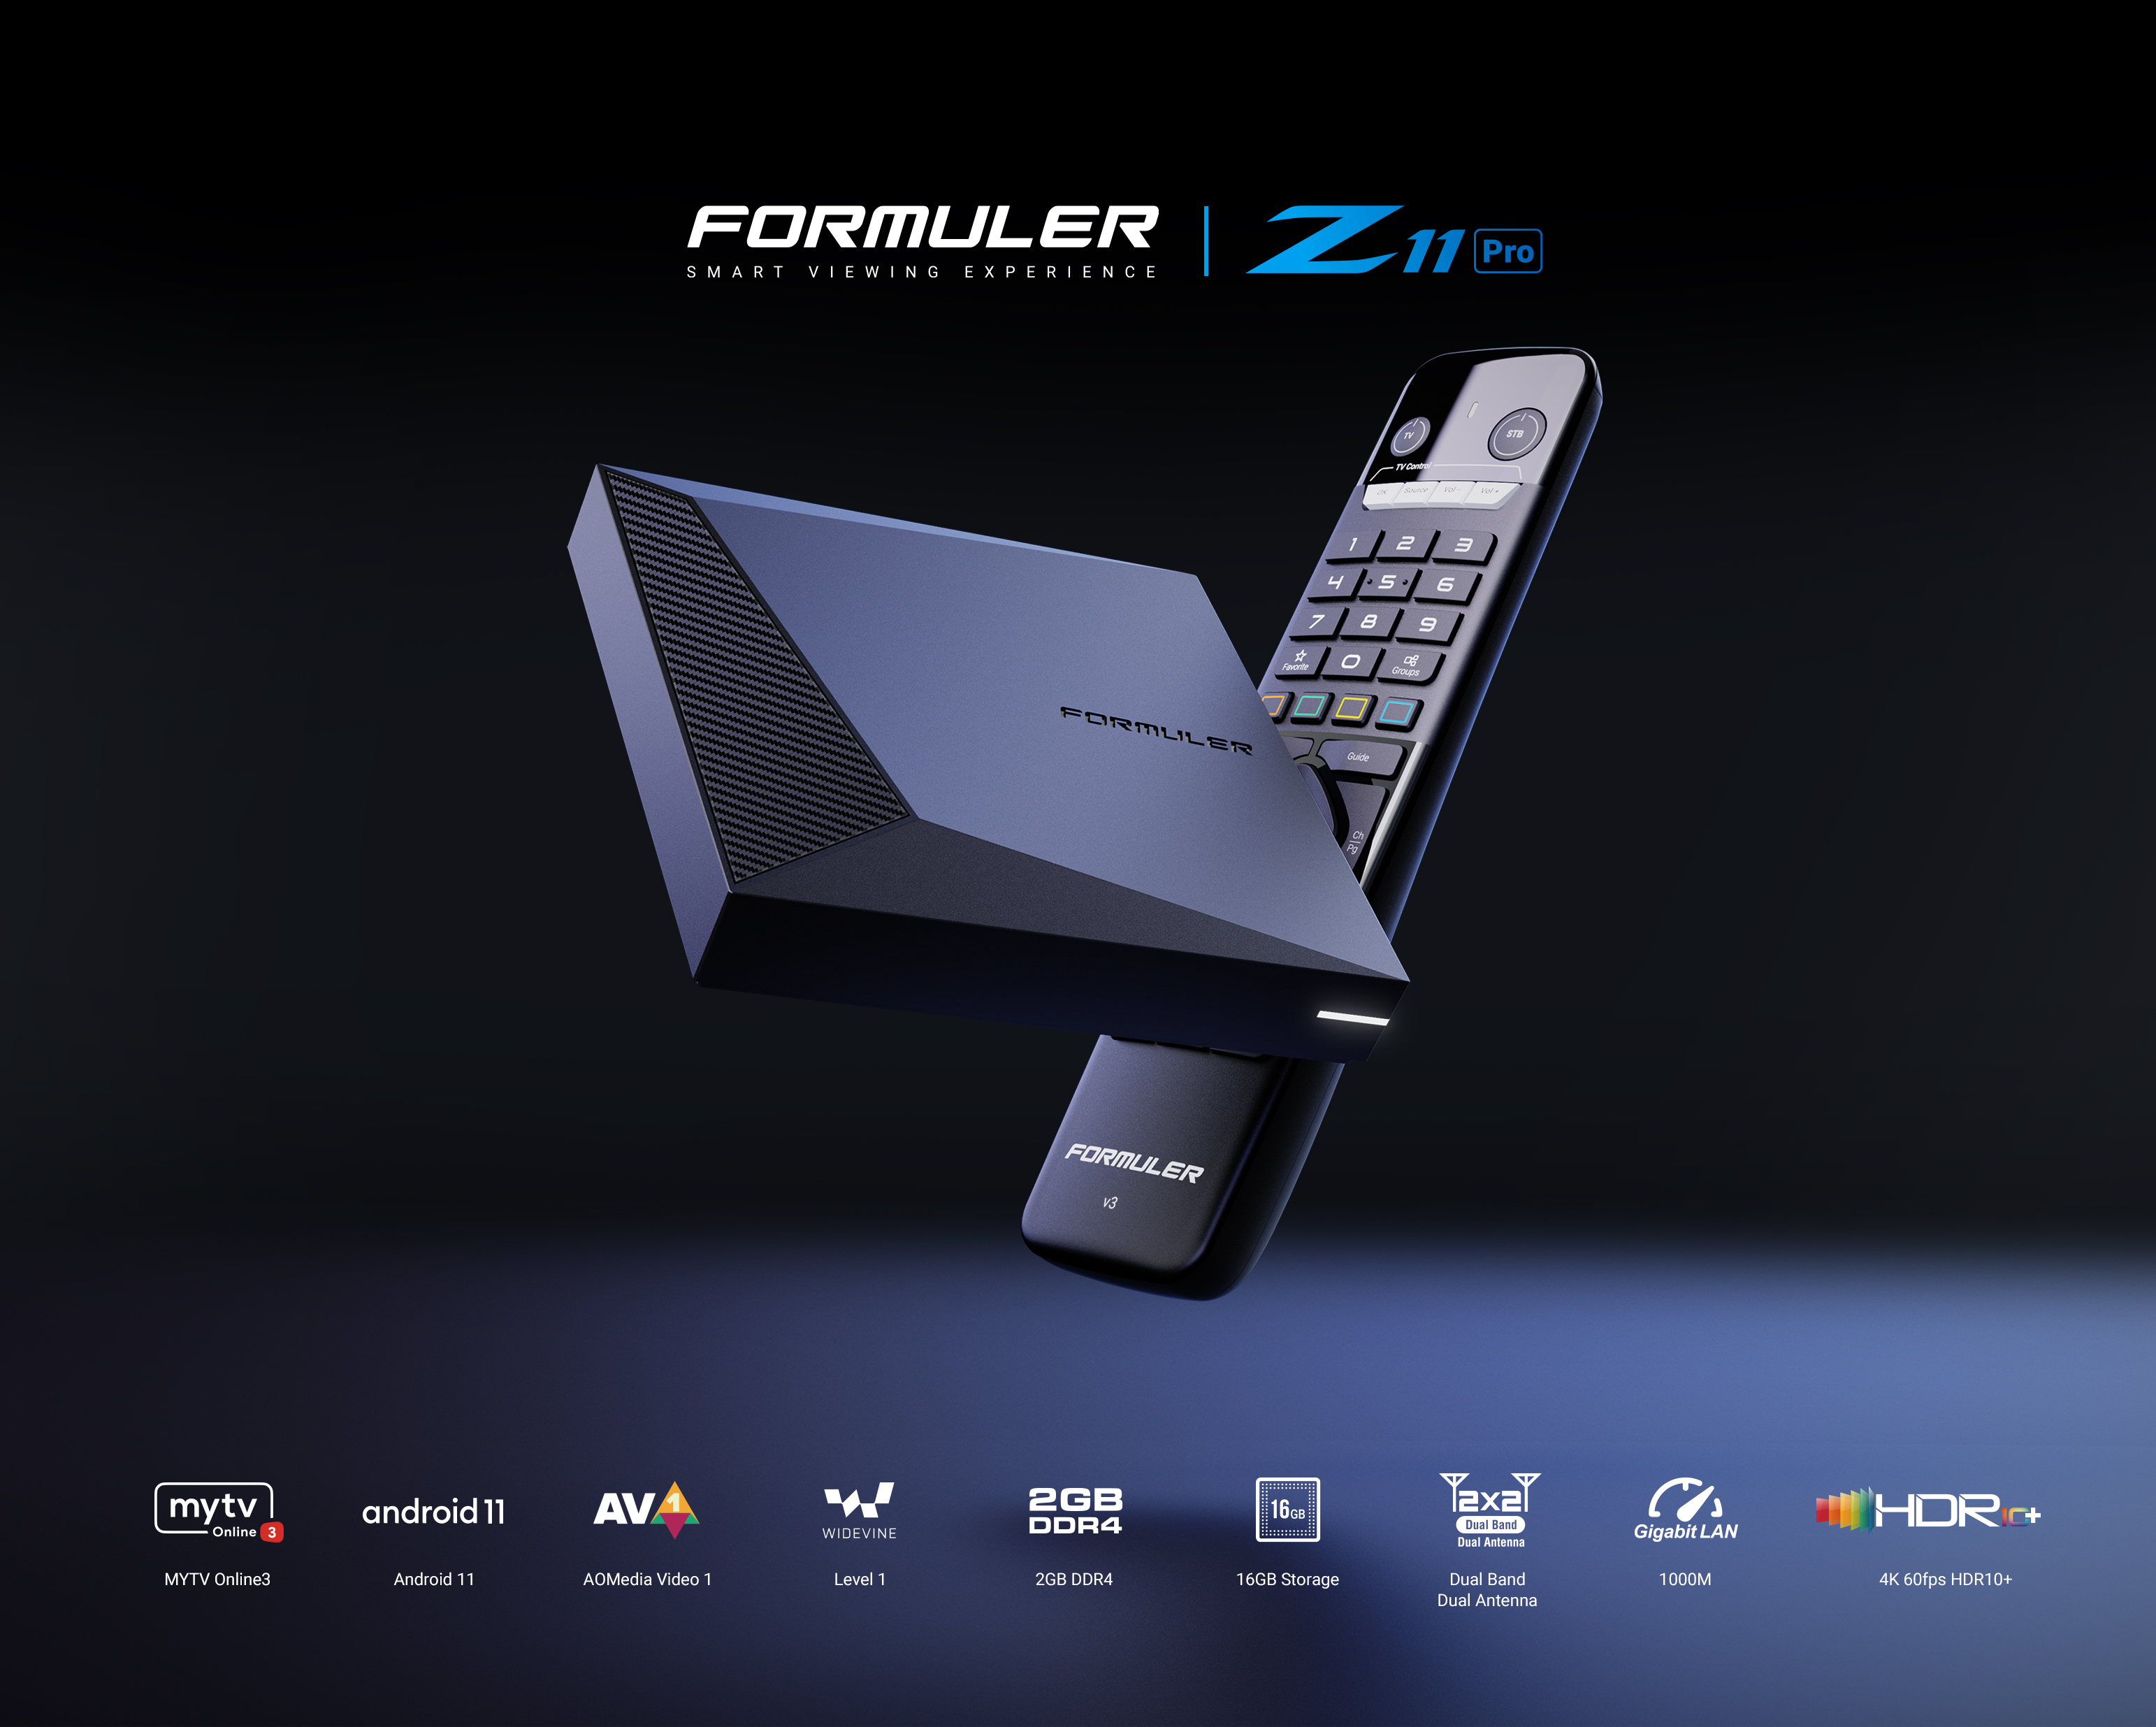 Buy Formuler Z11 Pro BT1 Edition MyTVOnline3 with incredible prices.